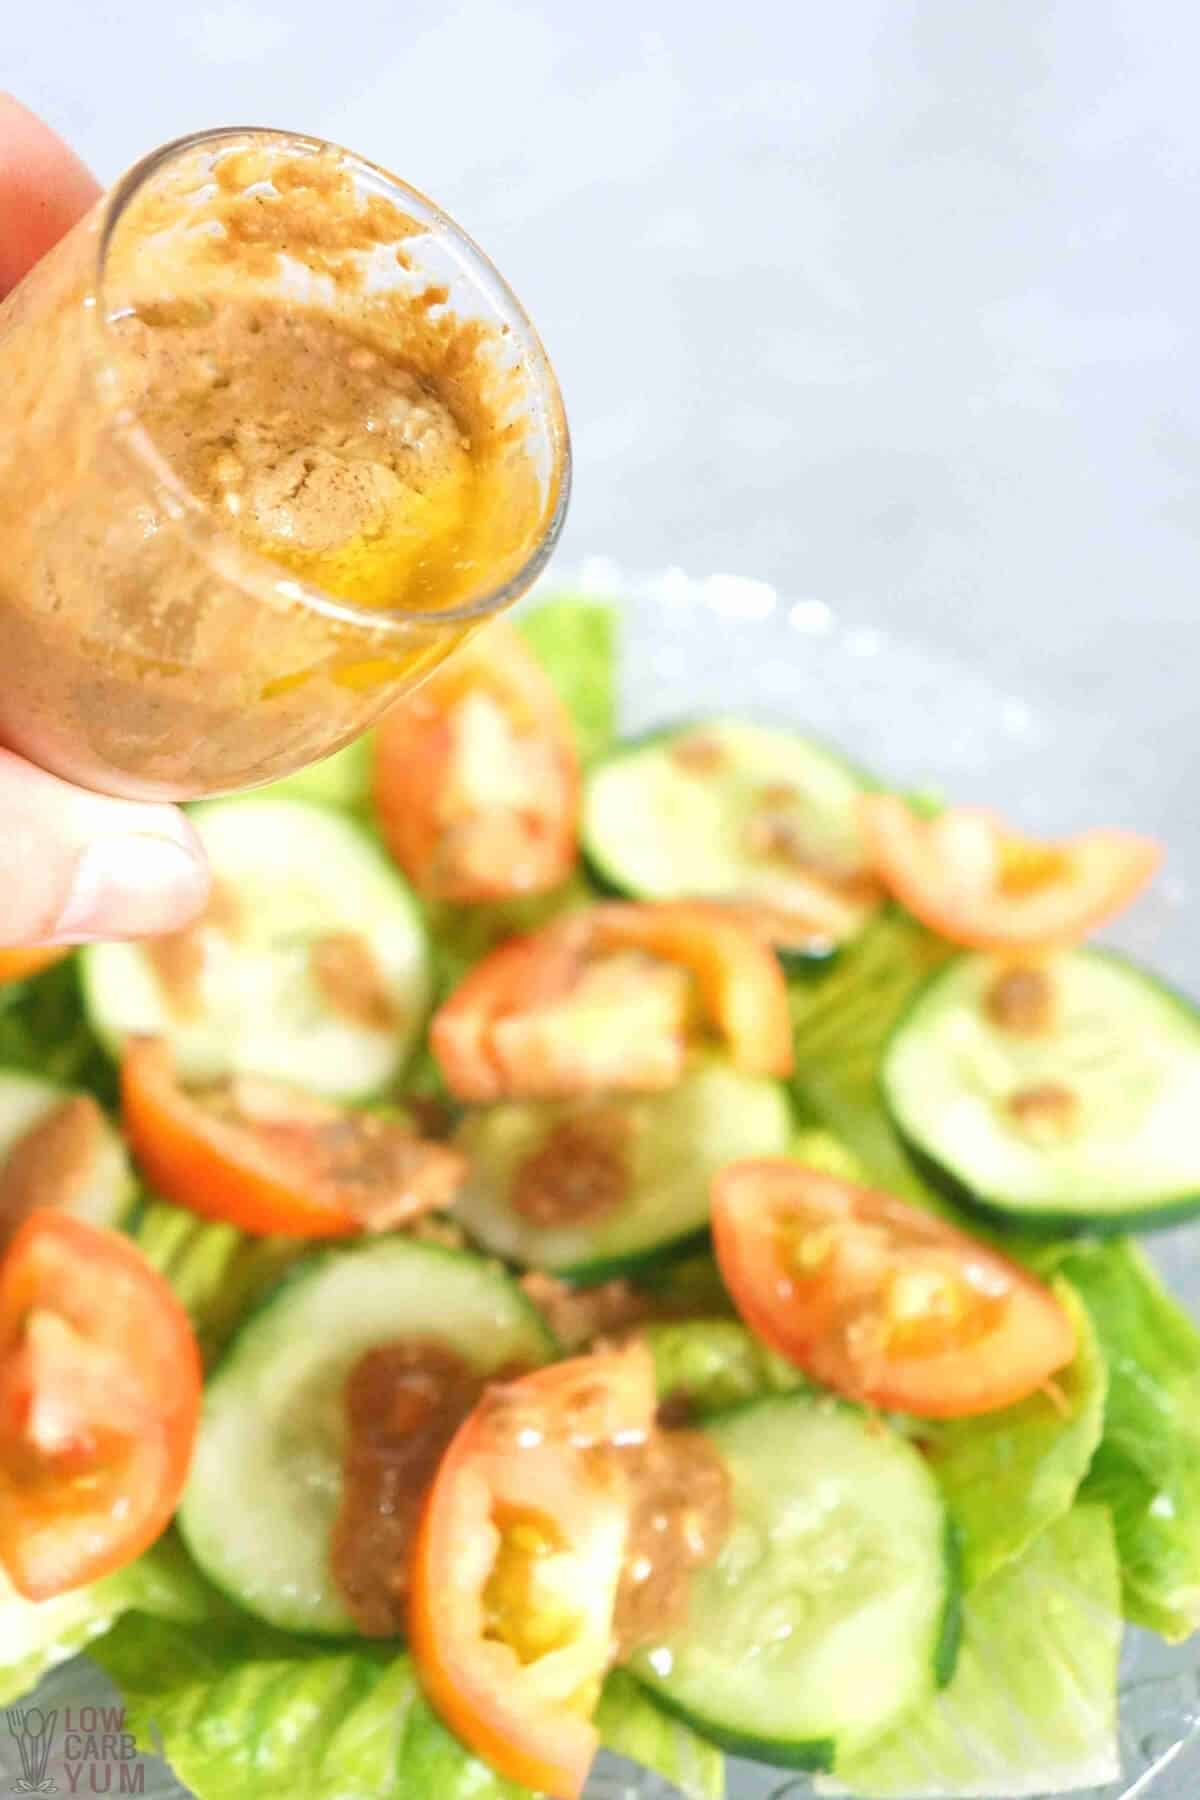 pouring dressing over salad